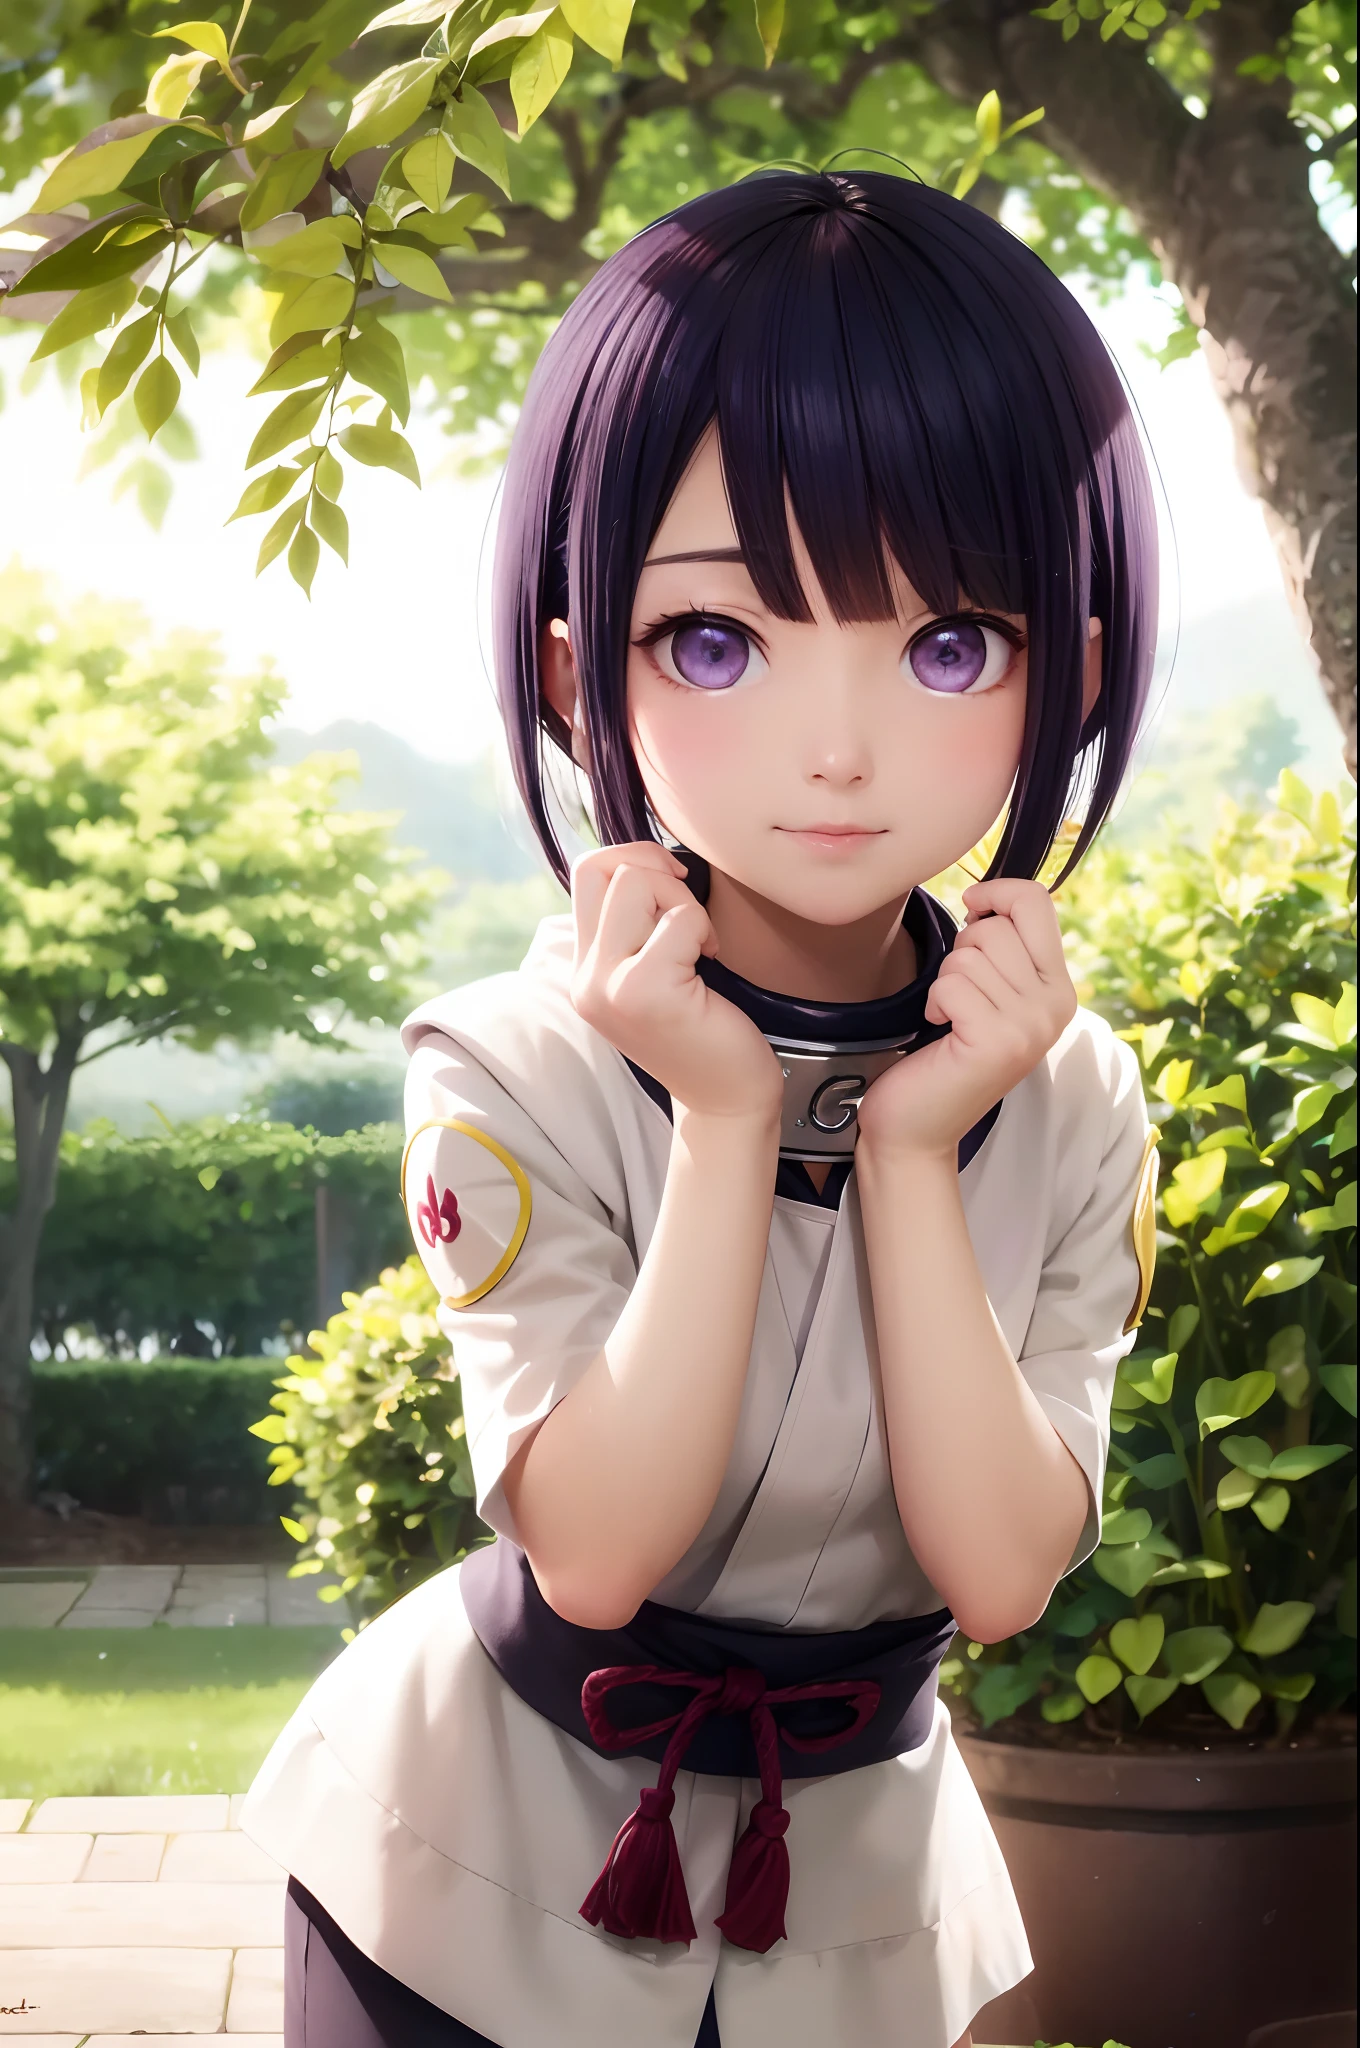 (The best quality,High Resolutions,Masterpiece:1.2),ultra detailed,realist,portraits,Hinata hyūga,Beautiful detailed eyes,beautiful detailed lips,Extremely detailed eyes and face,long eyeslashes,clear skin,pale complexion,shiny black hair,shoulder length hair,Characteristic lavender eyes,Calm expression,soft smile,understanding look,slender figure,white eyed ninja,User of Byakugan,Leaf Village Headband,Ninja attracts,68th Chief of the Hyūga Clan,protected by his Byakugan,Quiet garden background,lush green plants,colorful flowers blooming,soft sunlight flowing through the trees,ELEGANT POSE,standing among the cherry blossoms,Serene atmosphere,delicate beauty,Subtle hint of determination,Hint of wind gently blowing her hair,subtle shadows,painterly style,Soft color palette,Tonos outfits,Subtle reflections,Subtle shading,natural  lighting.